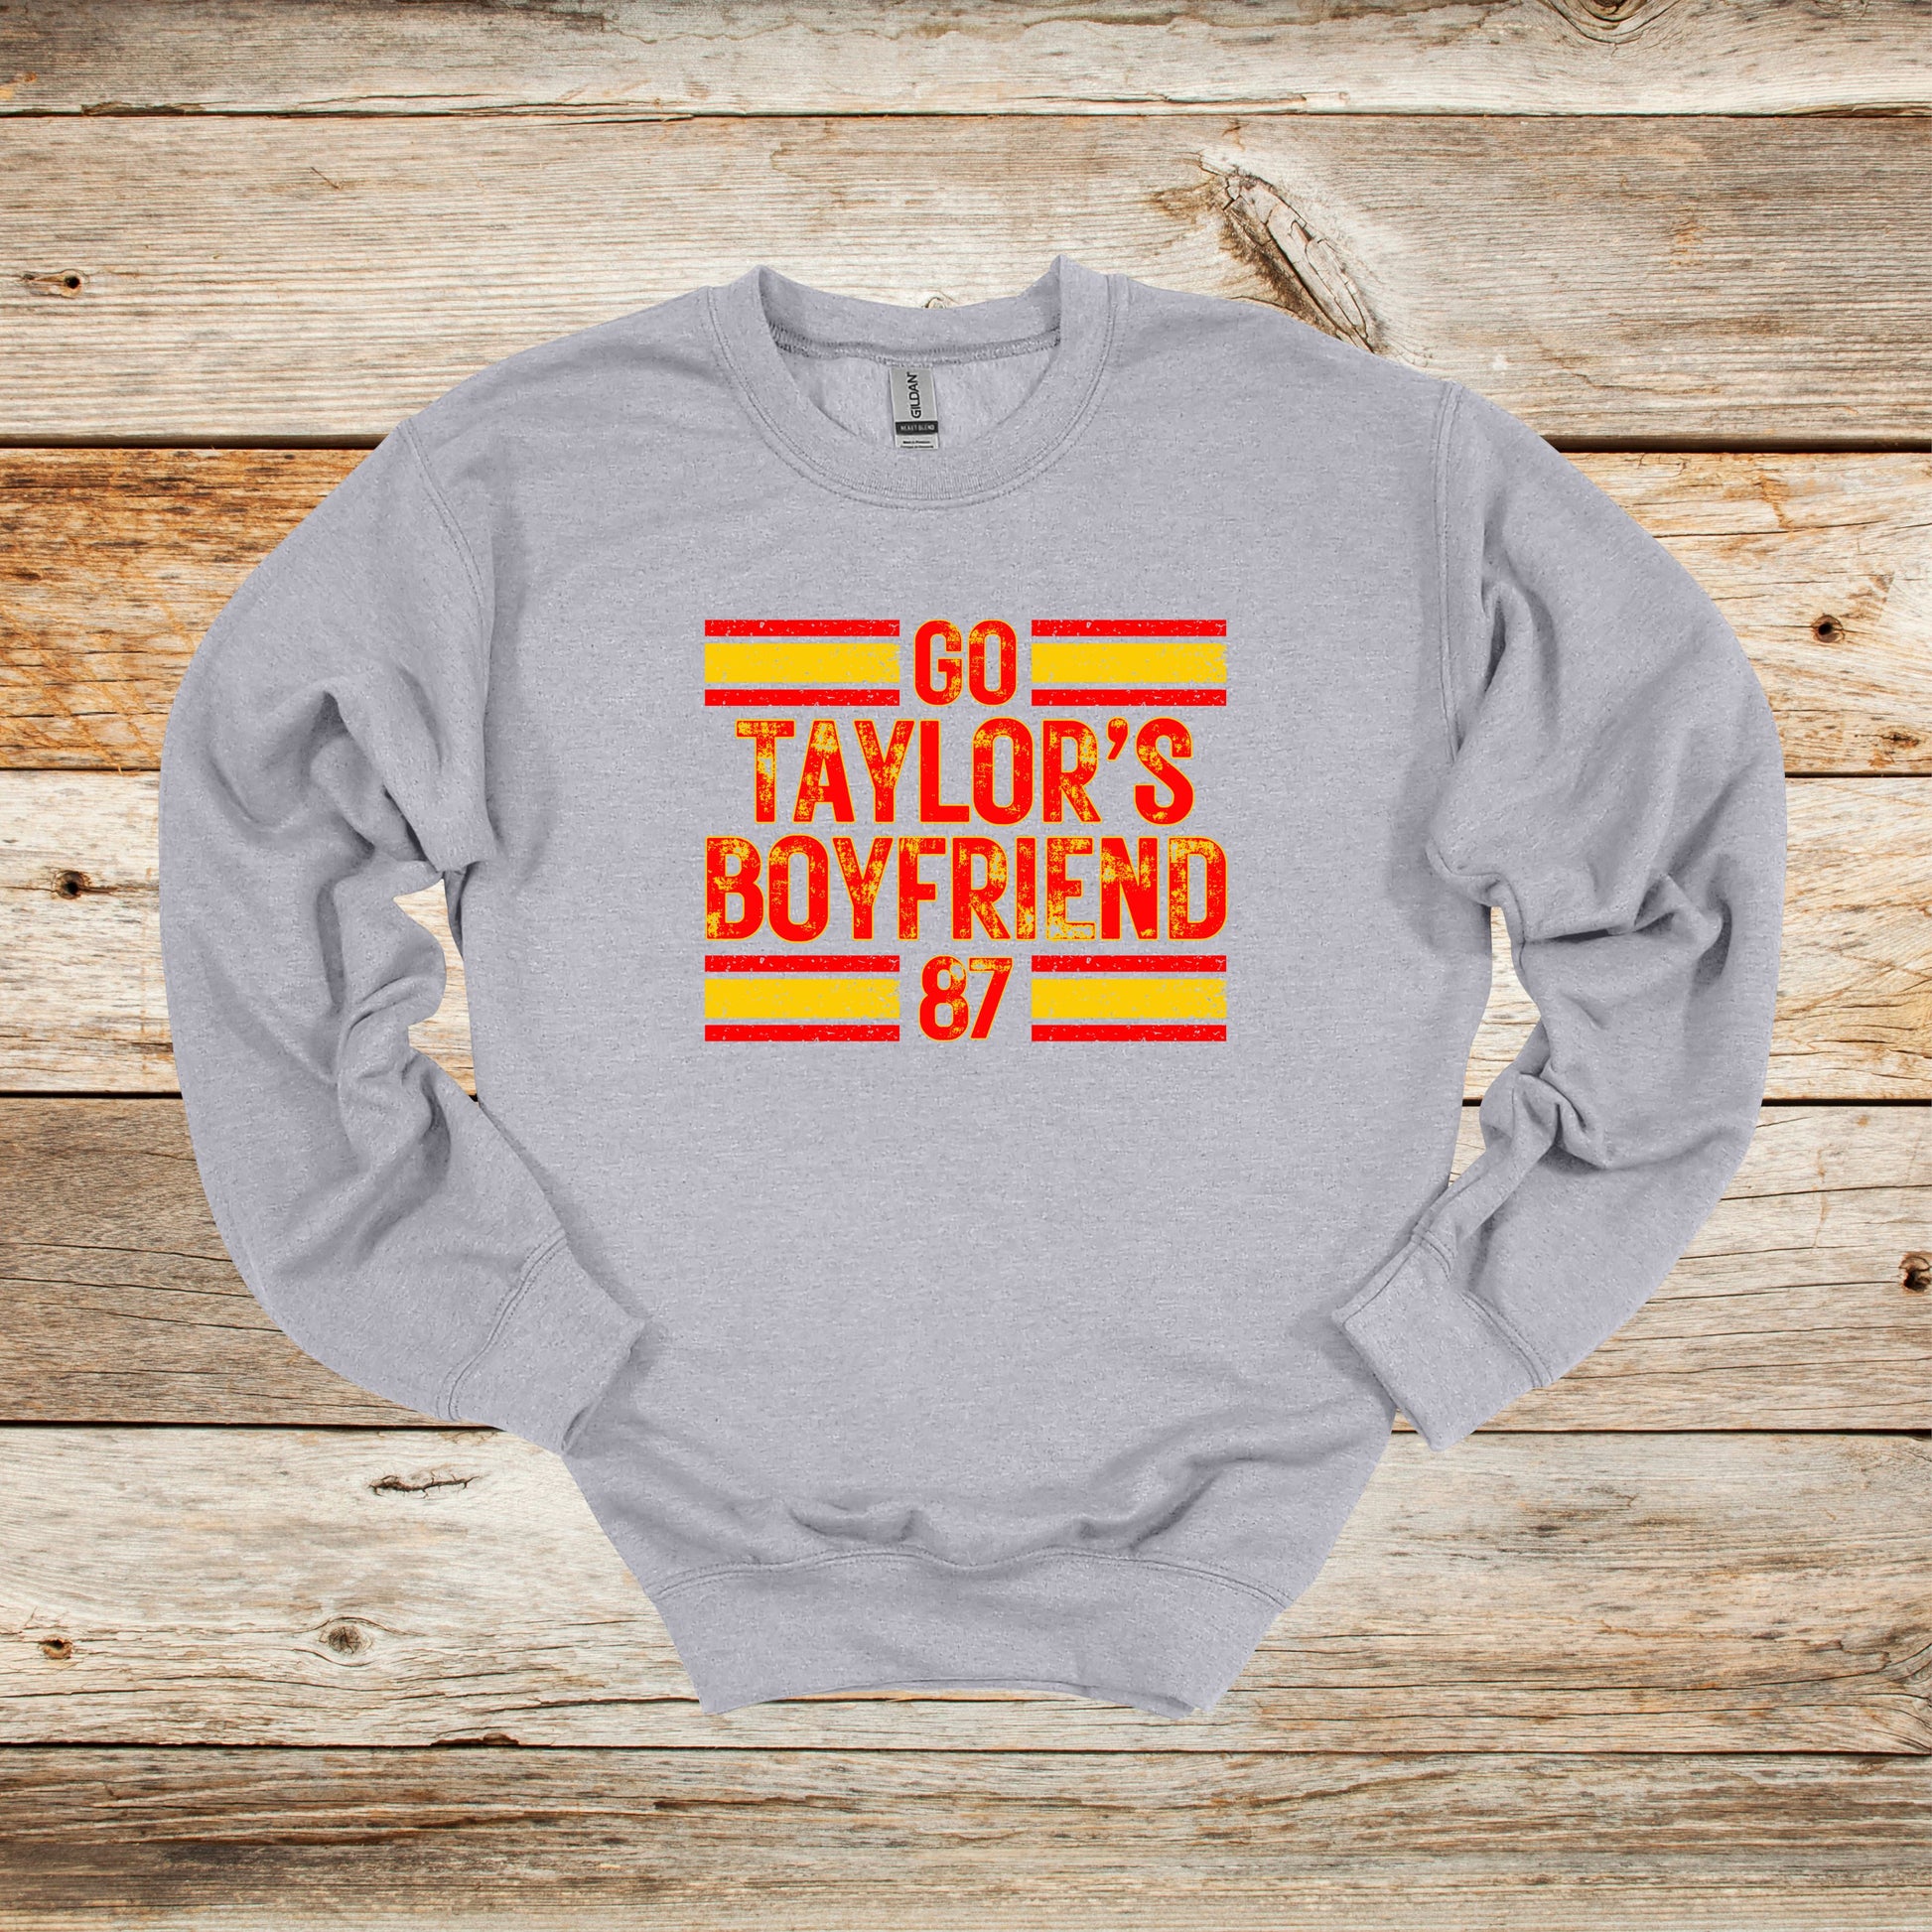 Football Crewneck and Hooded Sweatshirt - Kansas City Chiefs Football - Go Taylor's Boyfriend - Adult and Children's Tee Shirts - Sports Hooded Sweatshirt Graphic Avenue Crewneck Sweatshirt Sport Grey Adult Small